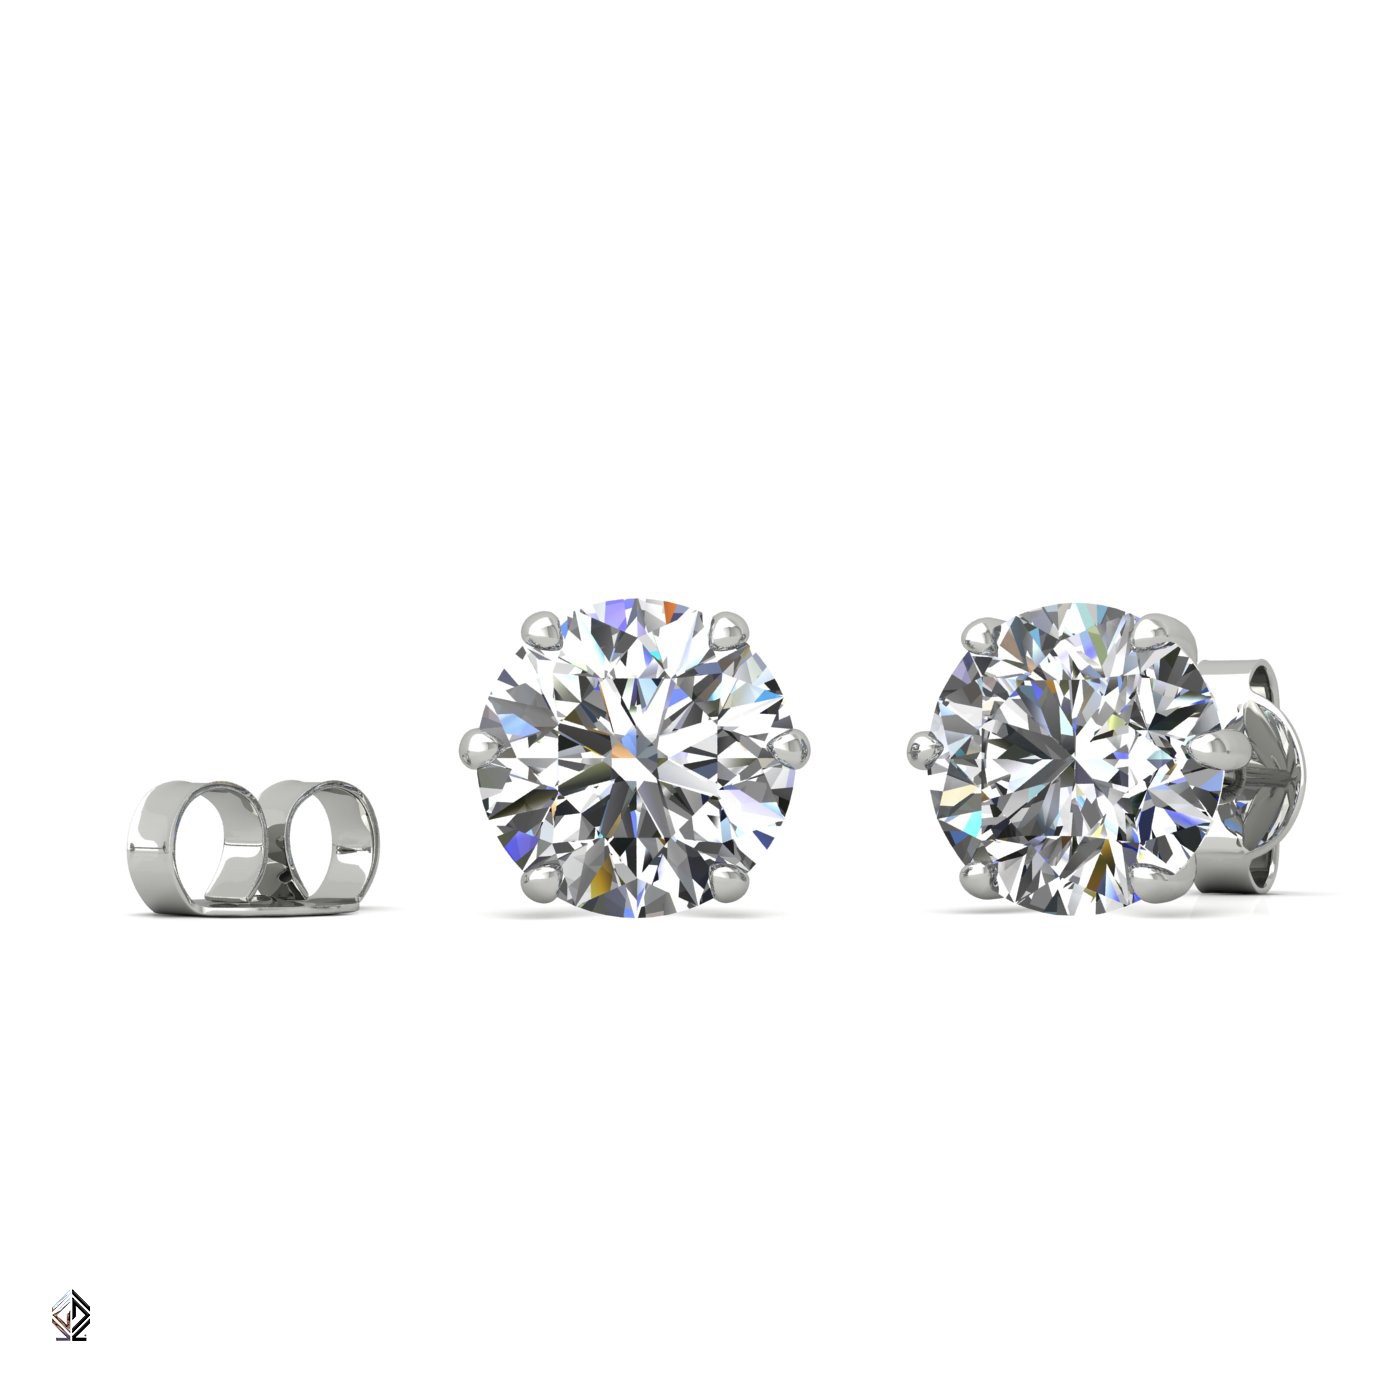 18k white gold 2.0 ct each (4,0 tcw) 6 prongs round shape diamond earrings Photos & images